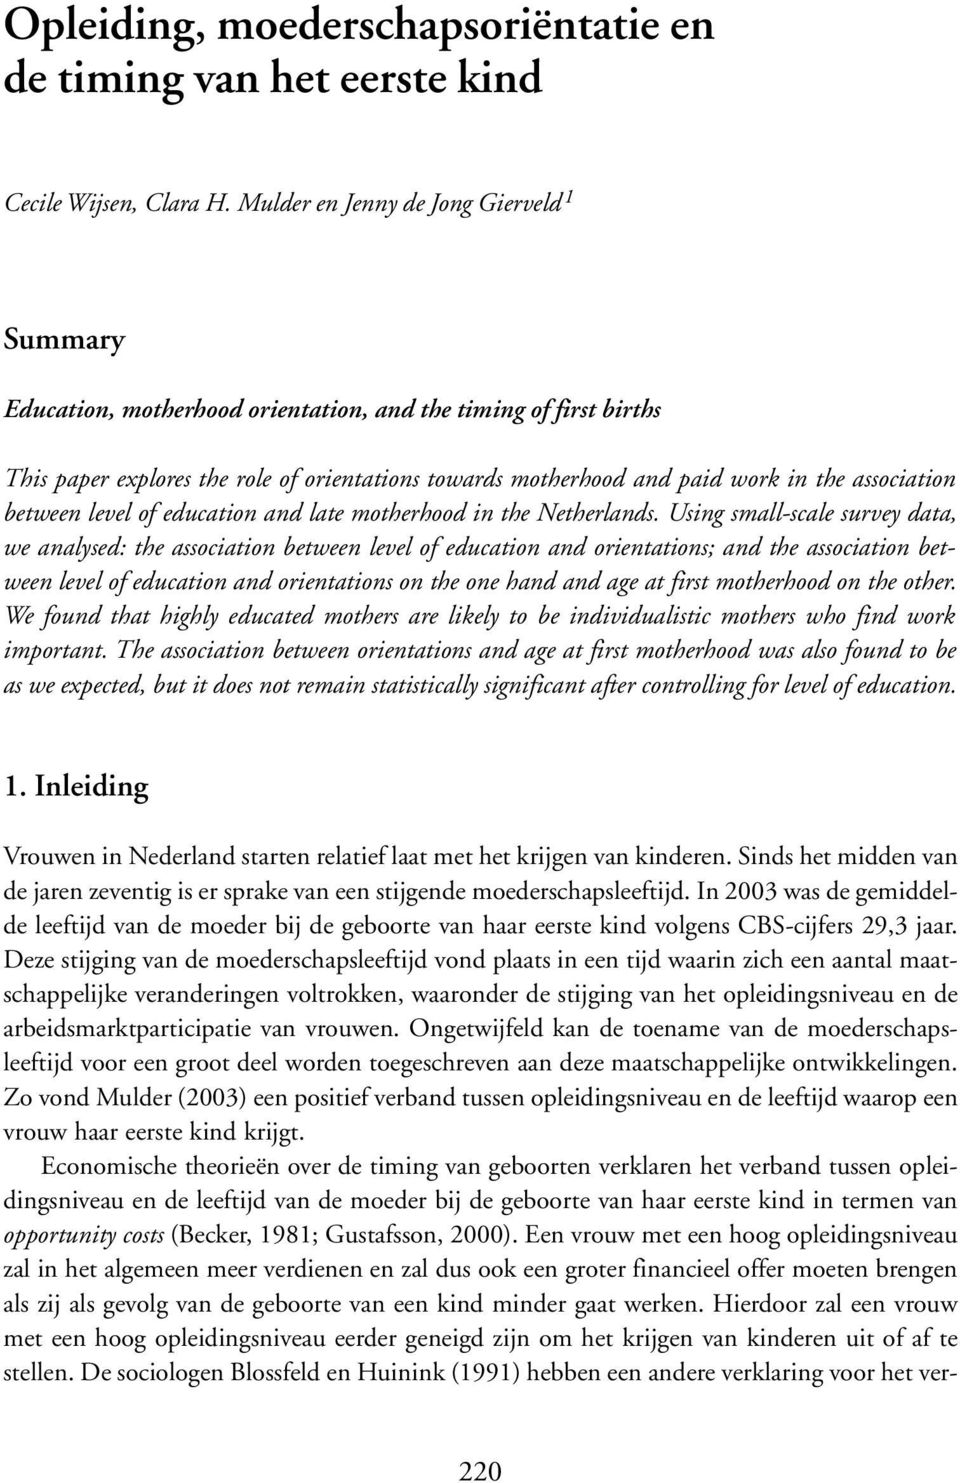 association between level of education and late motherhood in the Netherlands.